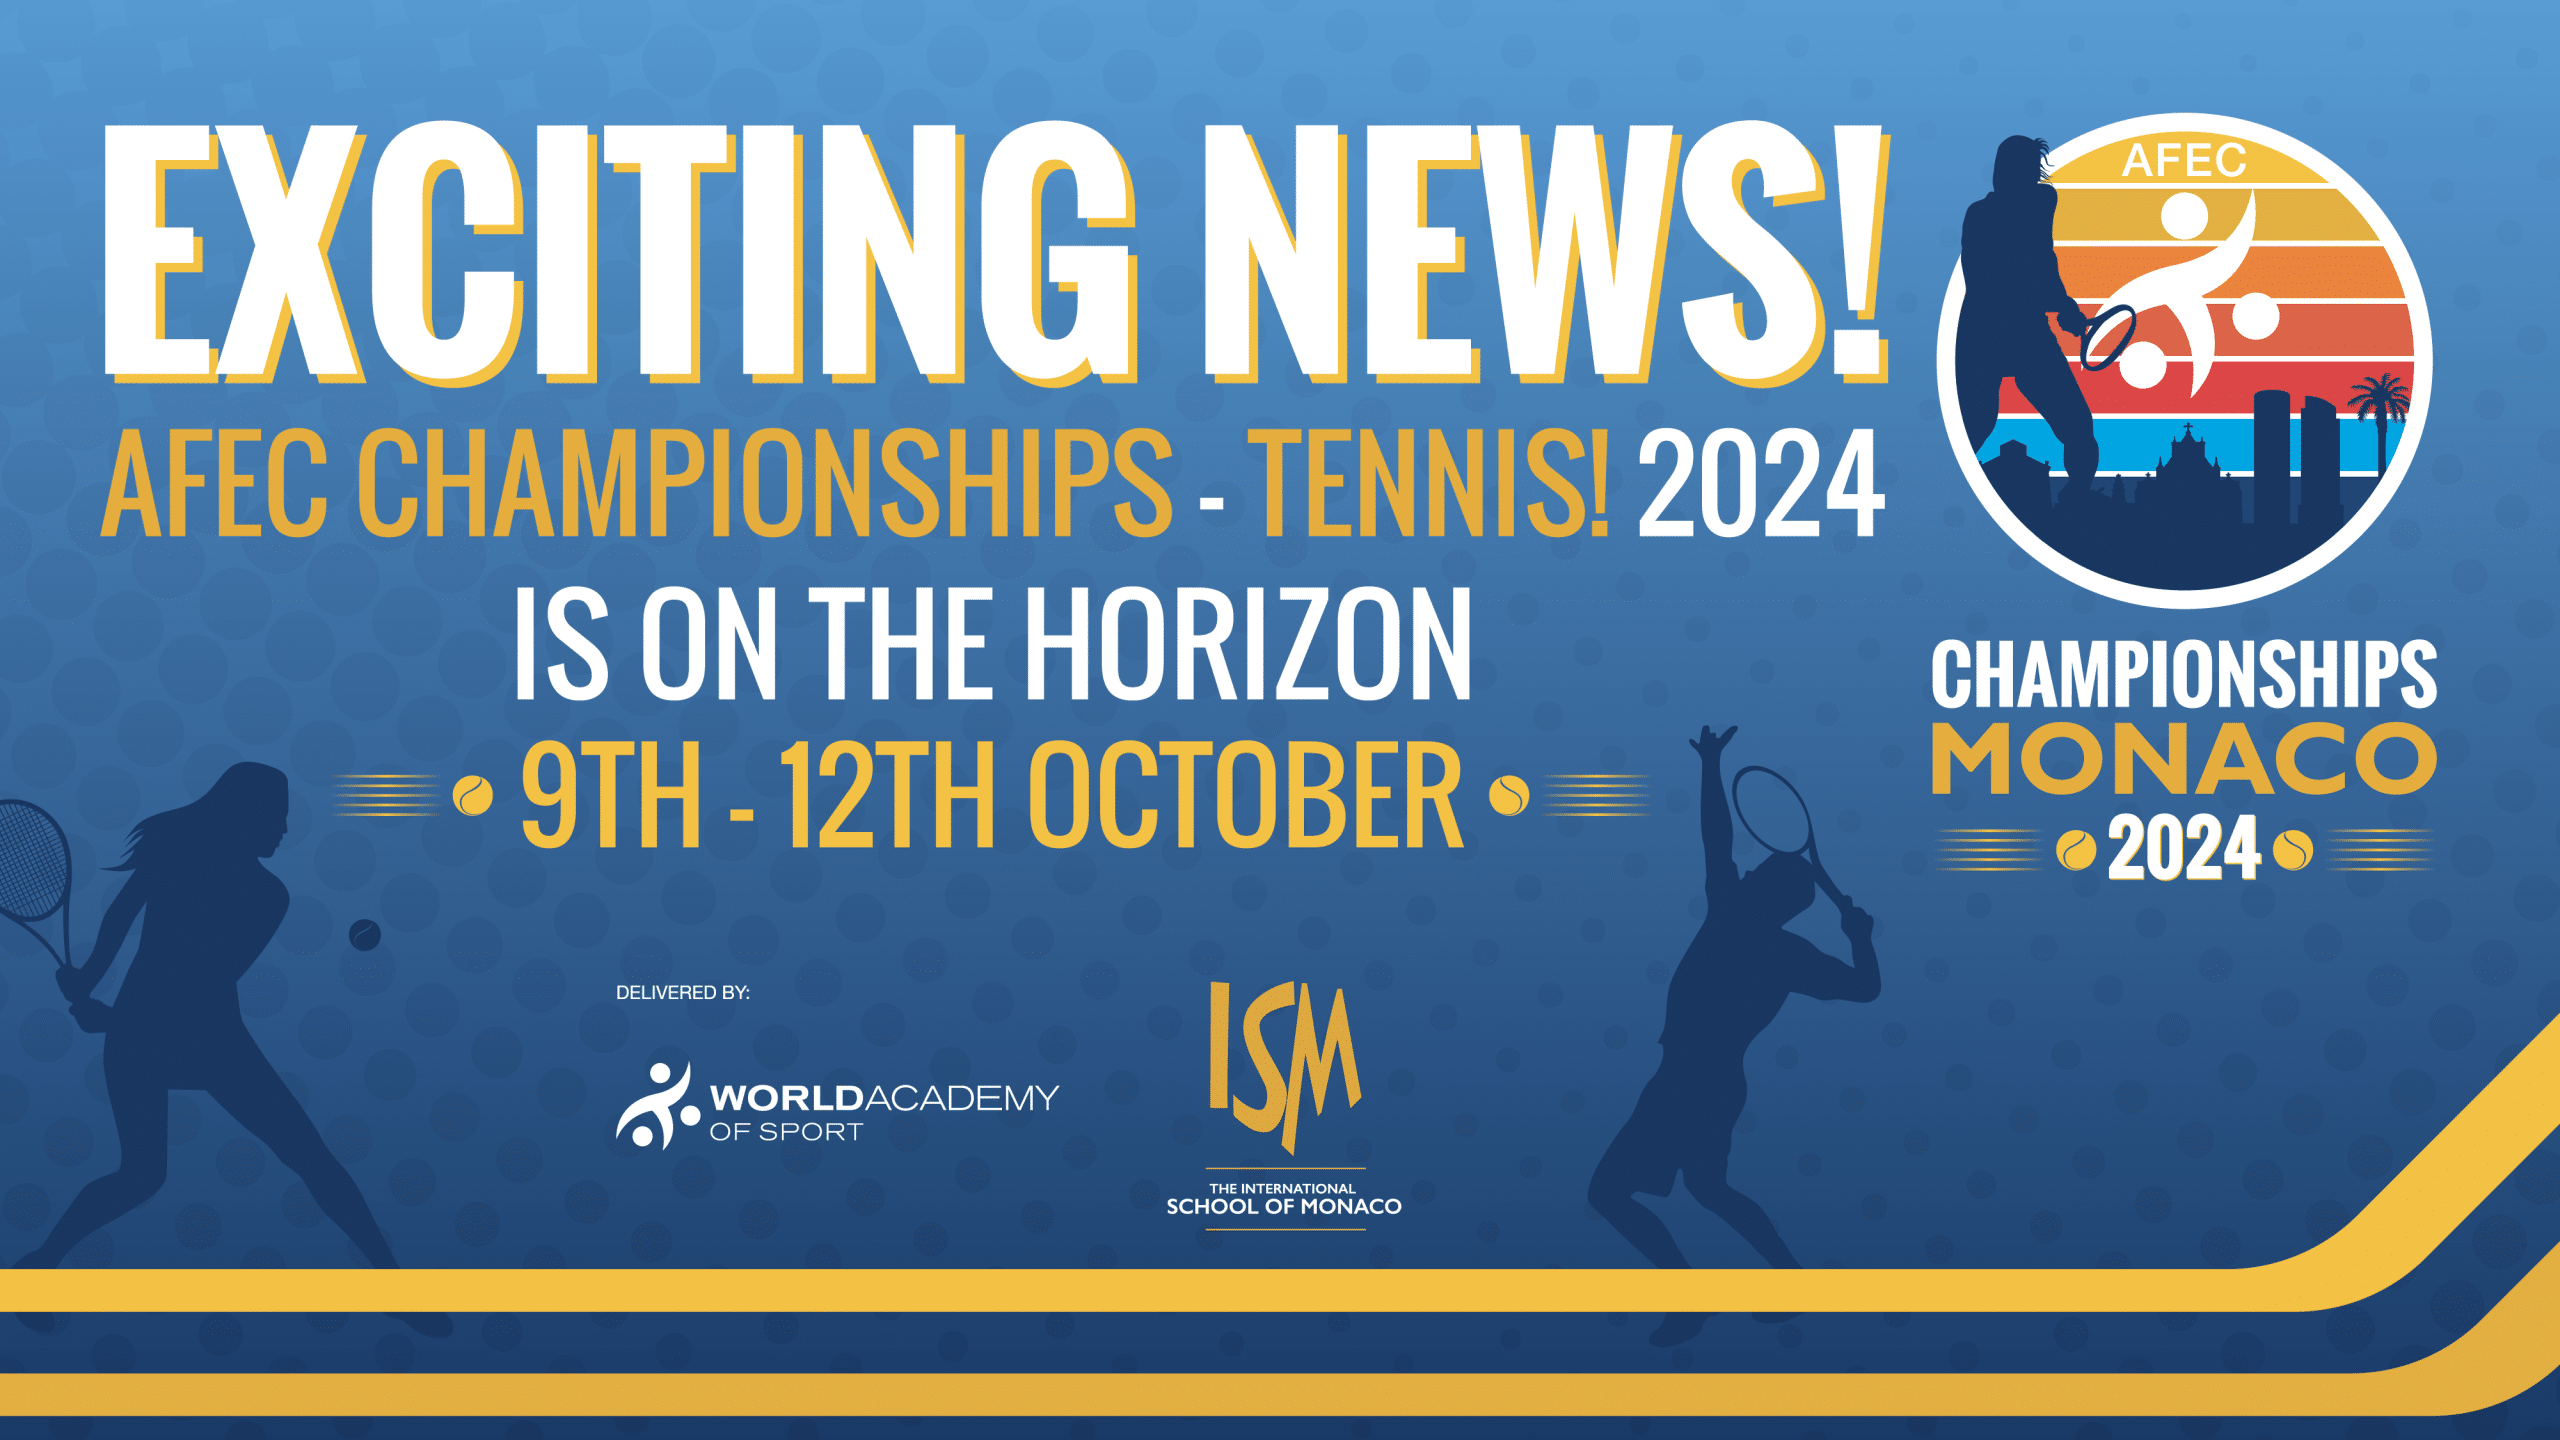 ISM and WAoS launch the 2nd AFEC Championships – Tennis! Image